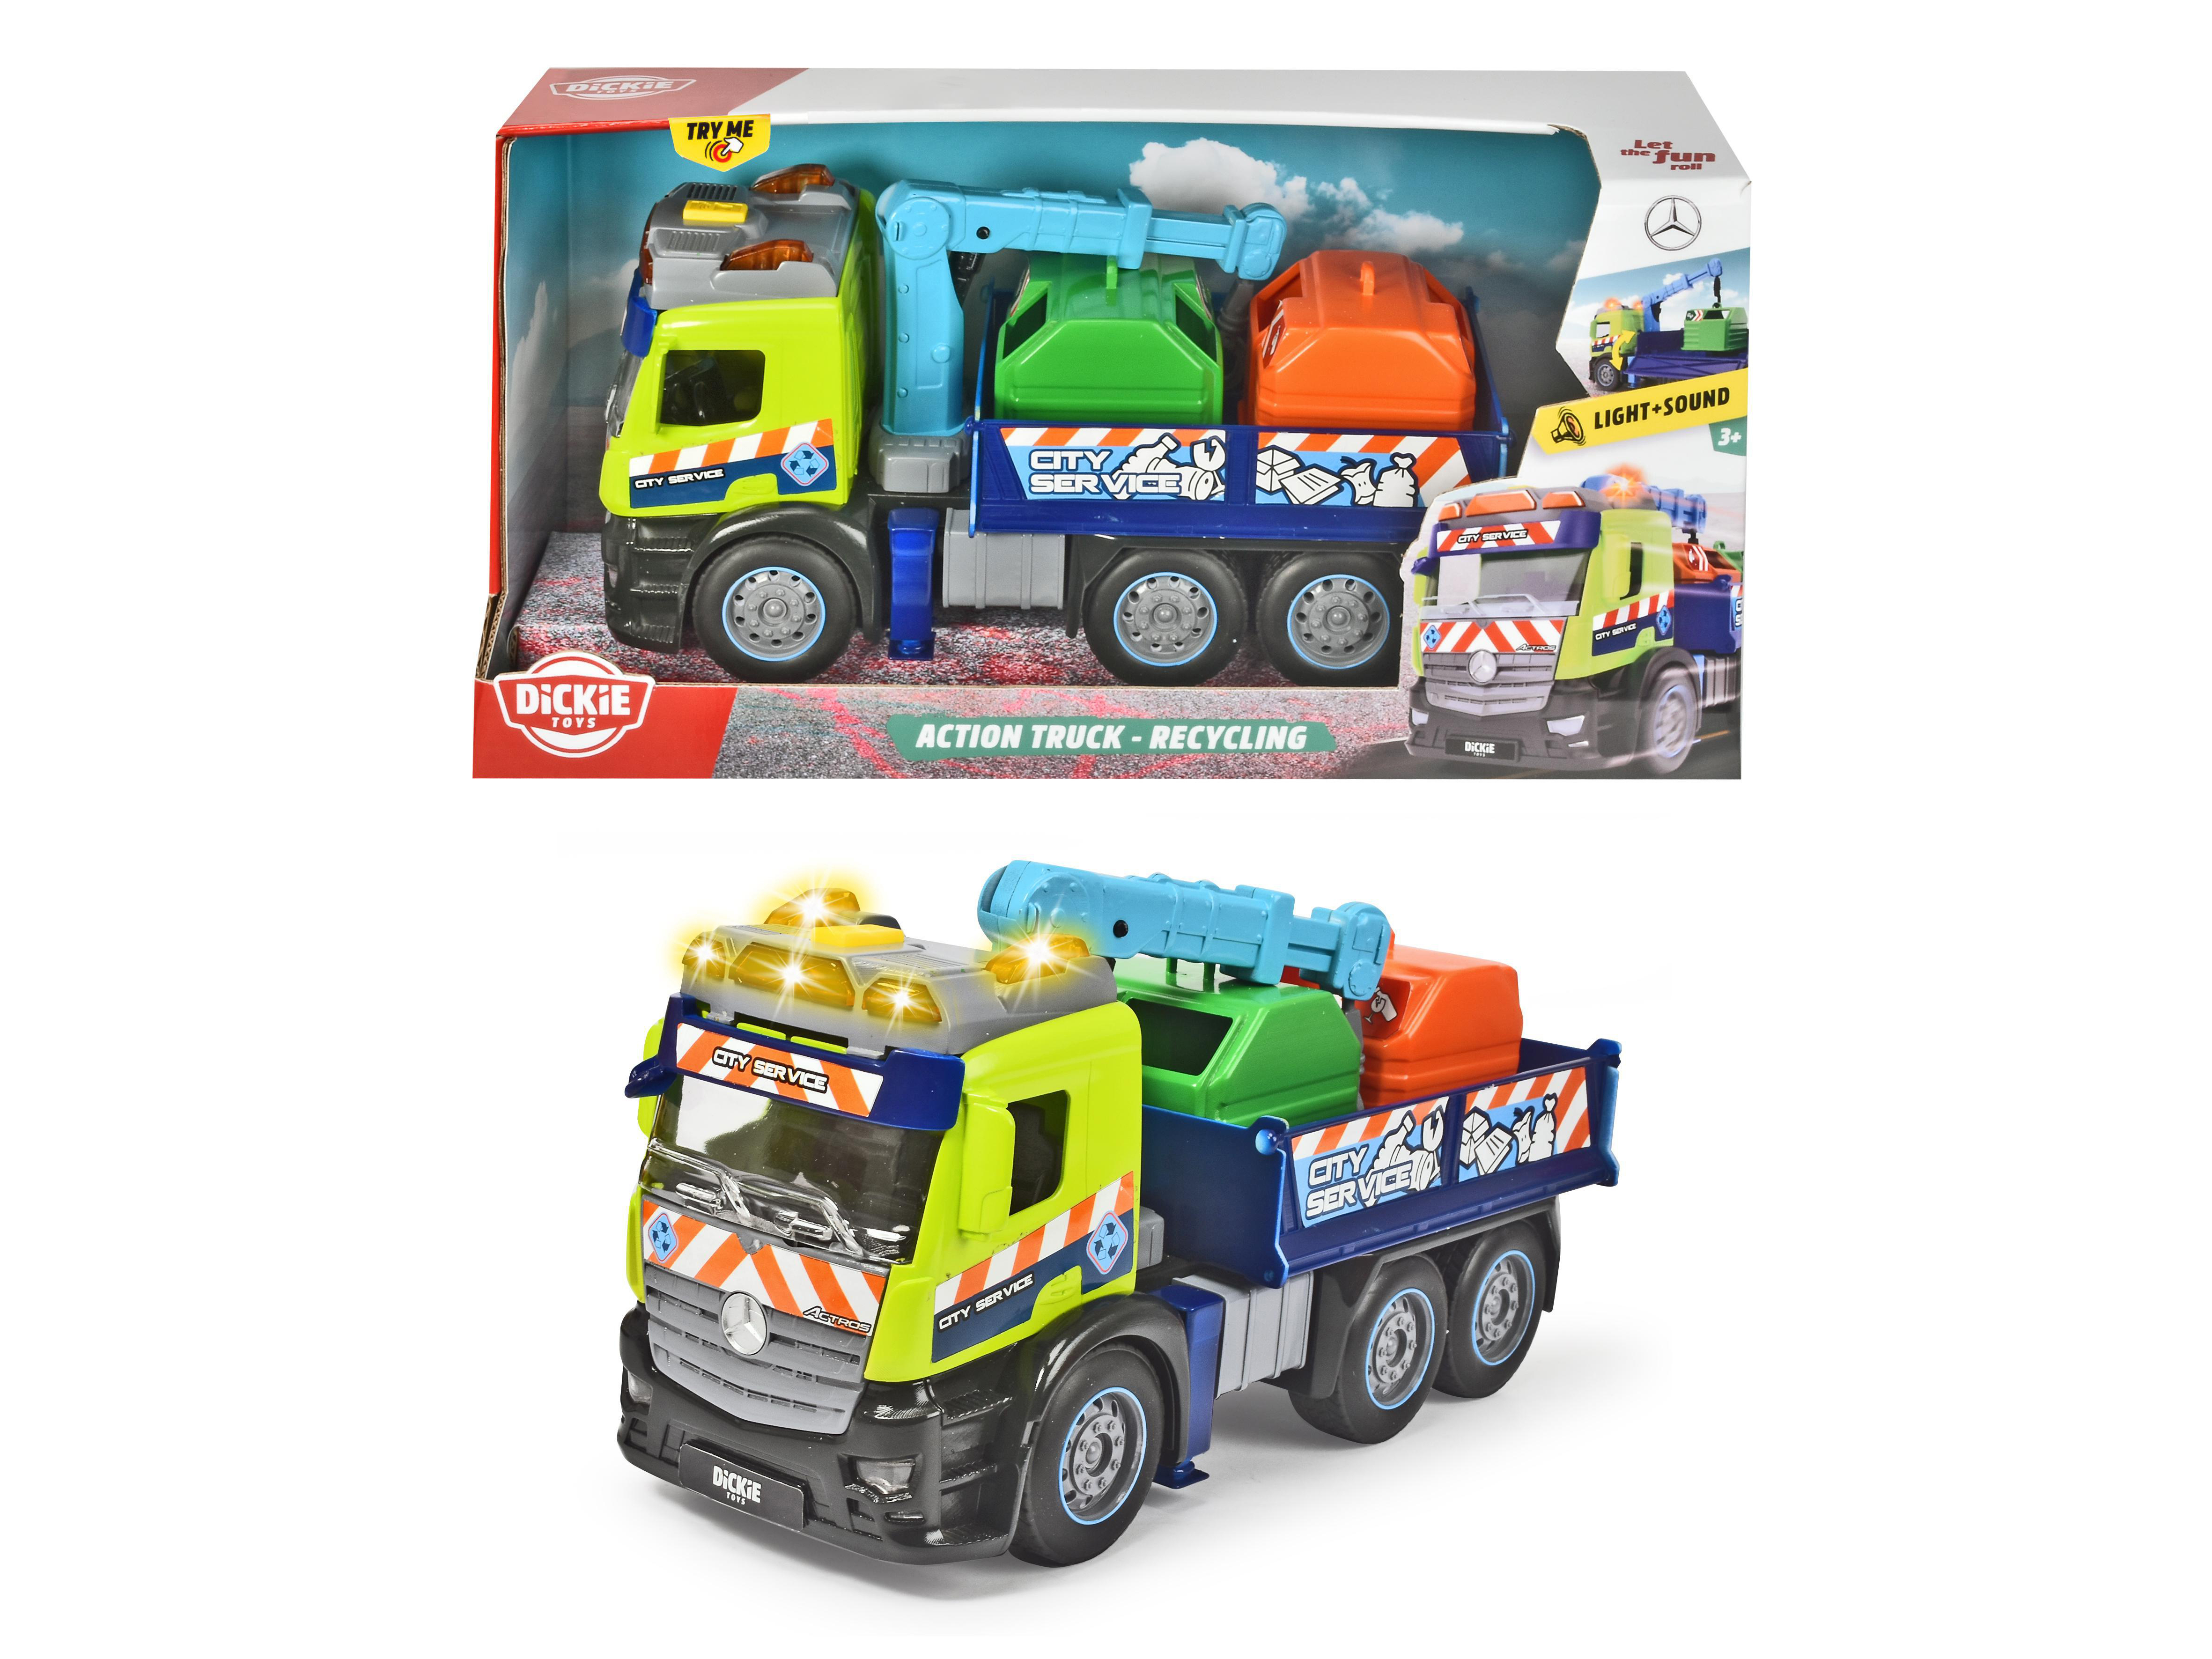 Mercedes inkl. Mehrfarbig Spielzeugauto Recycling, DICKIE-TOYS Truck, & Friktion, Sound Licht Container,